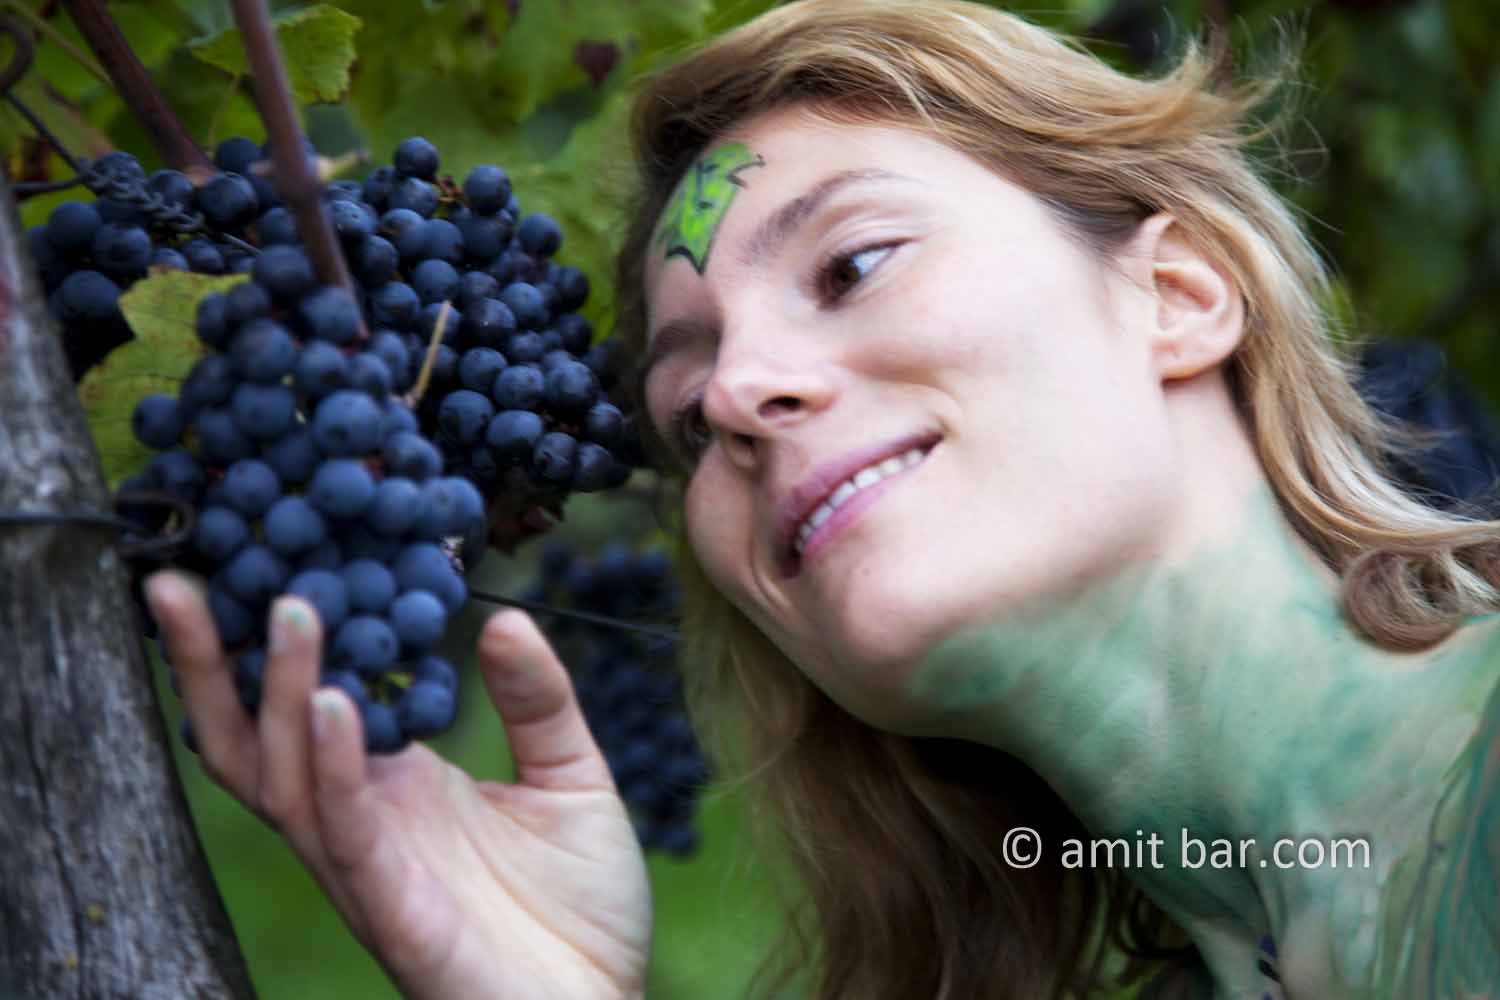 Grapes VI: Body-painted model in the vineyard